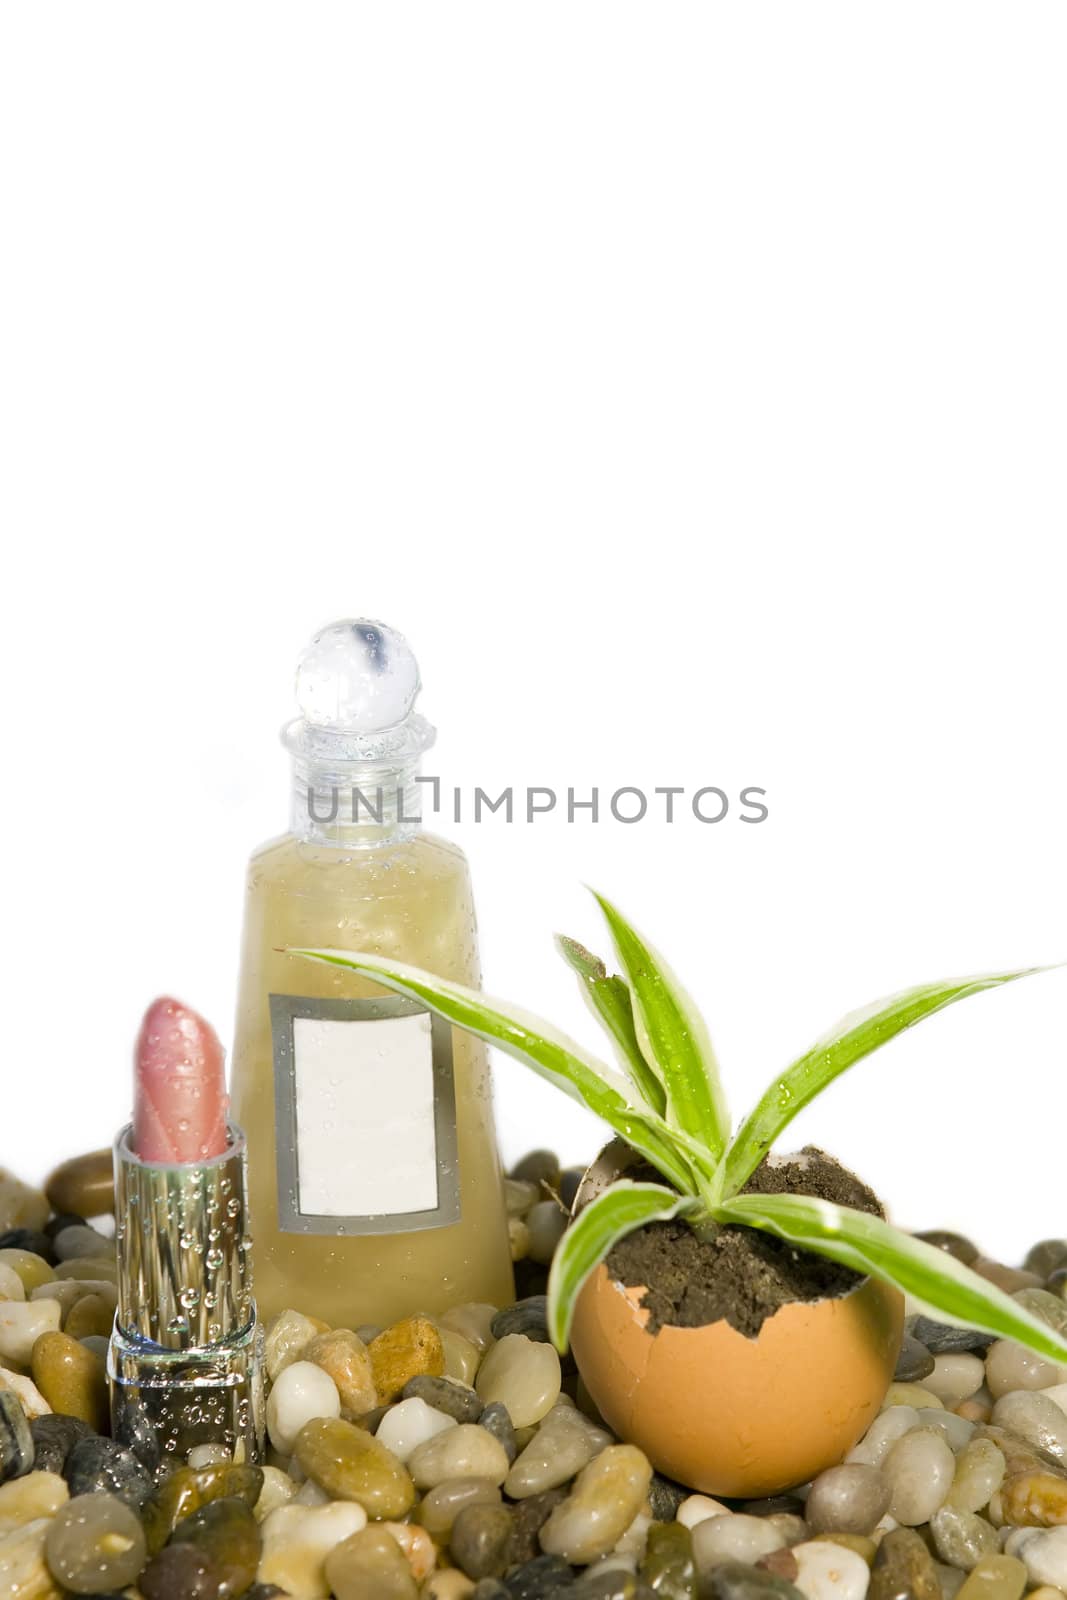 Cosmetics against white background, on pebbles